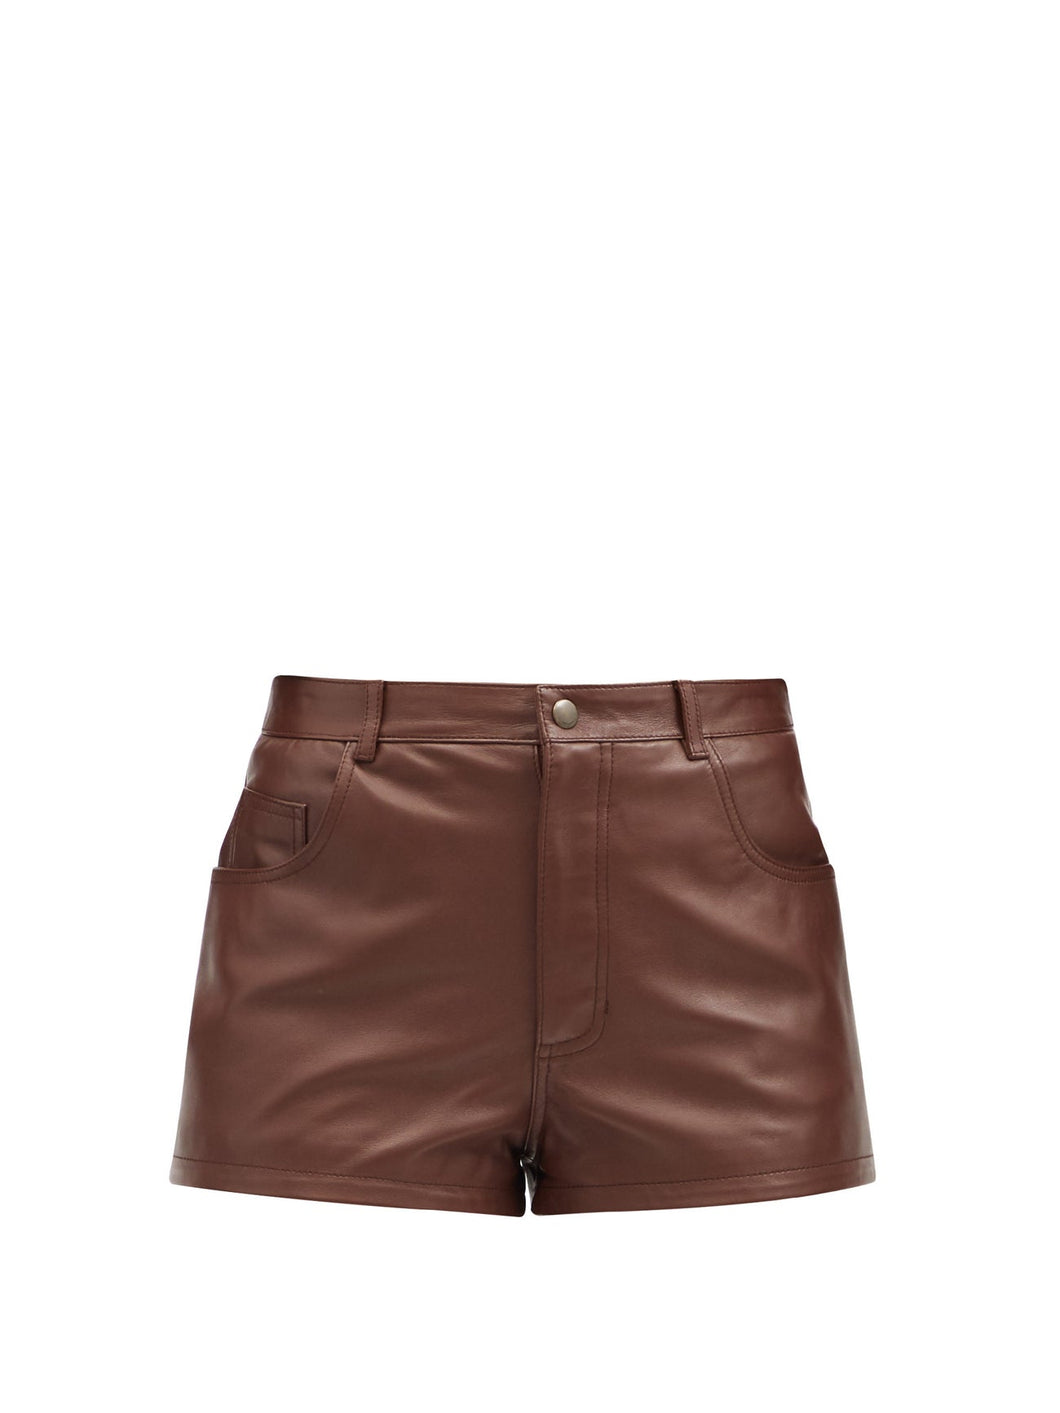 Ladies High Rise Brown Leather Shorts